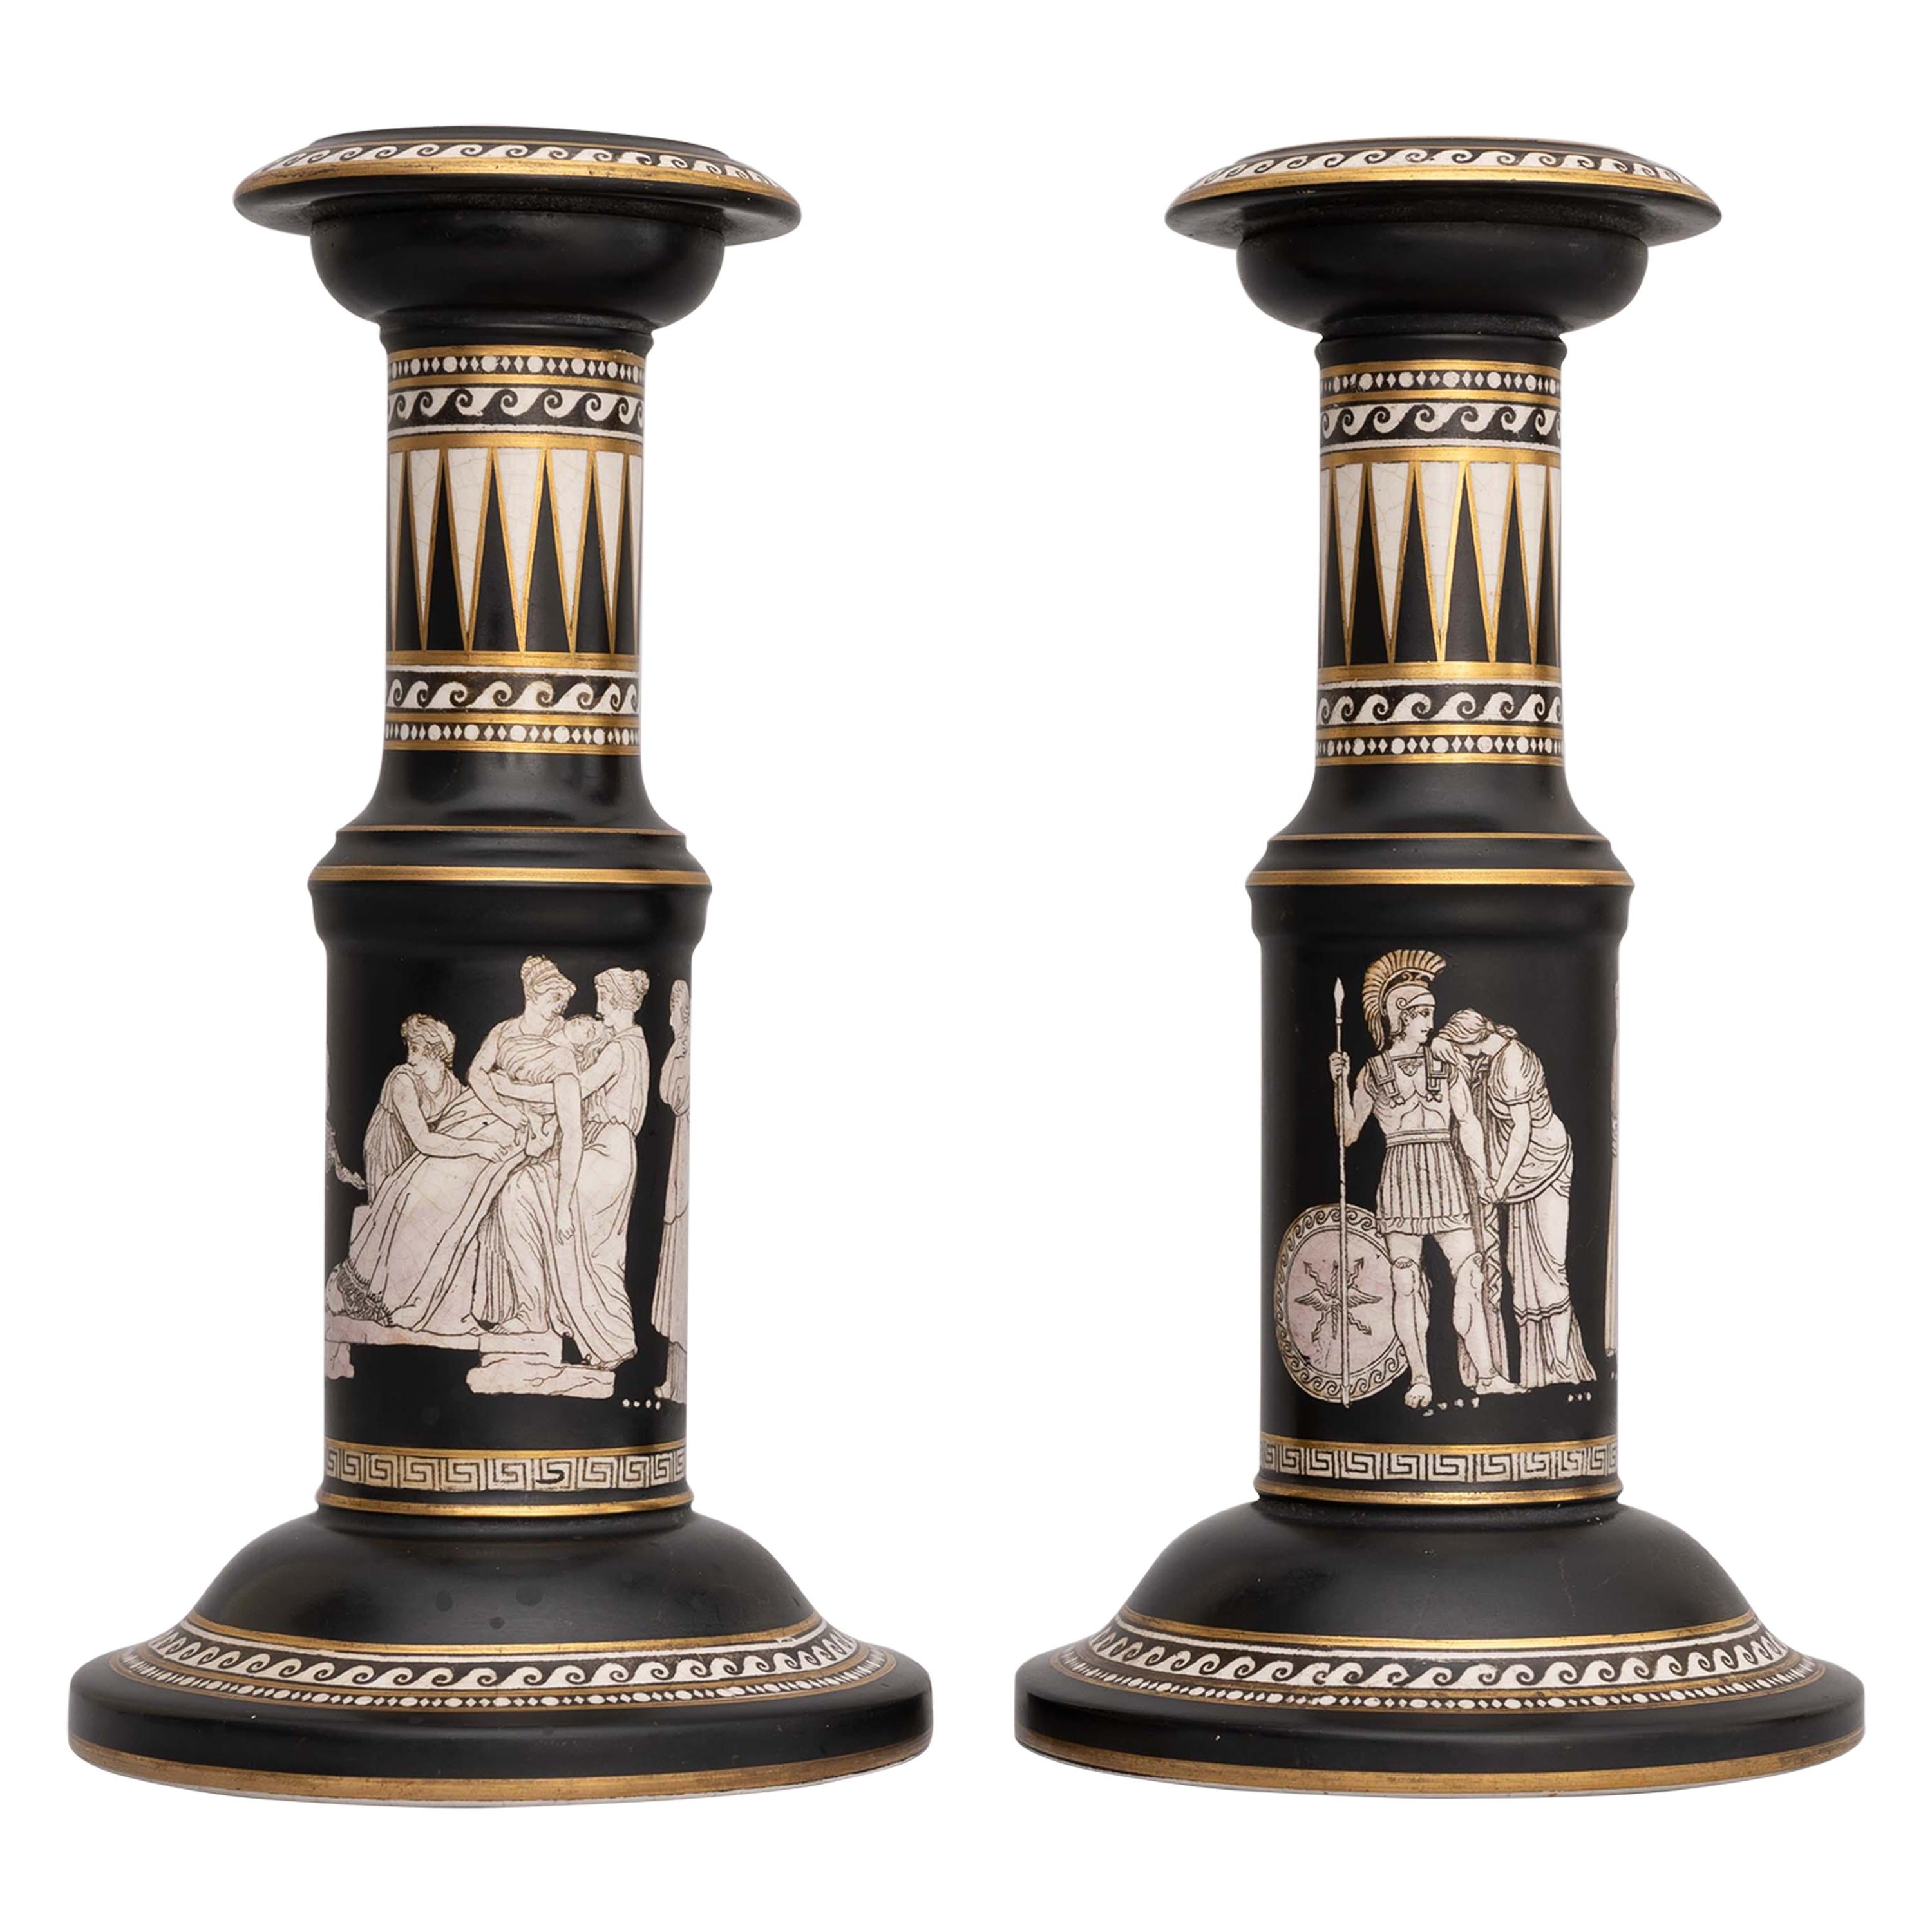 Pair of Neoclassical Pottery Candlesticks by Pratt